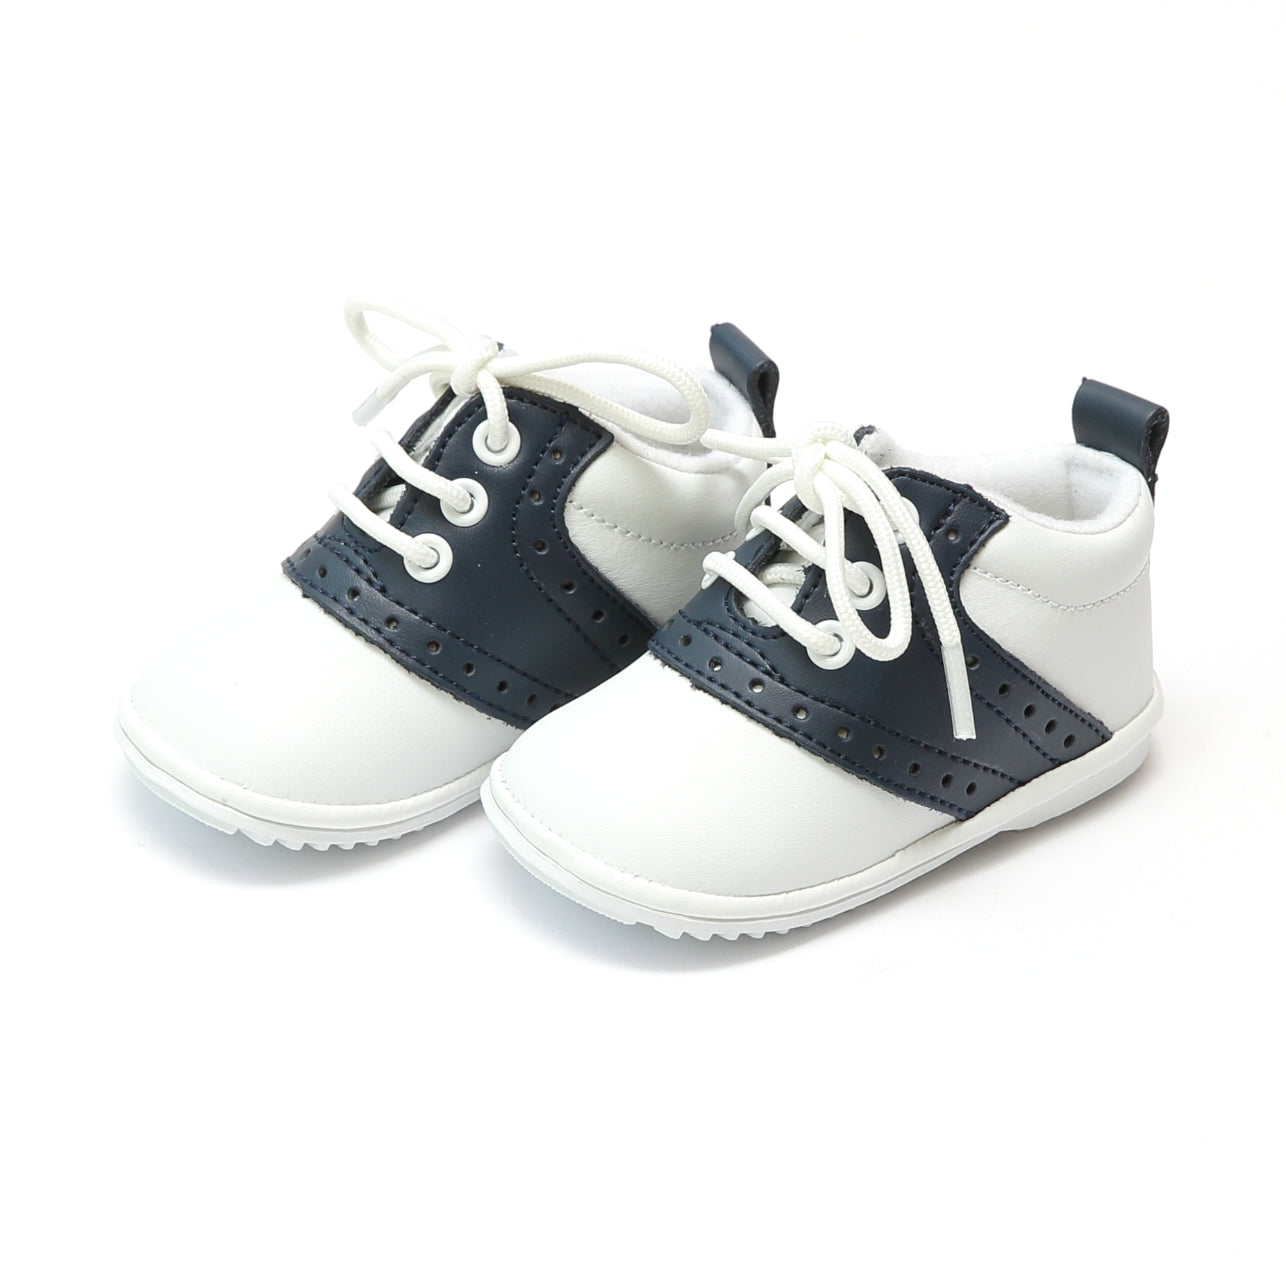 Angel Baby Shoes hi-top oxfords